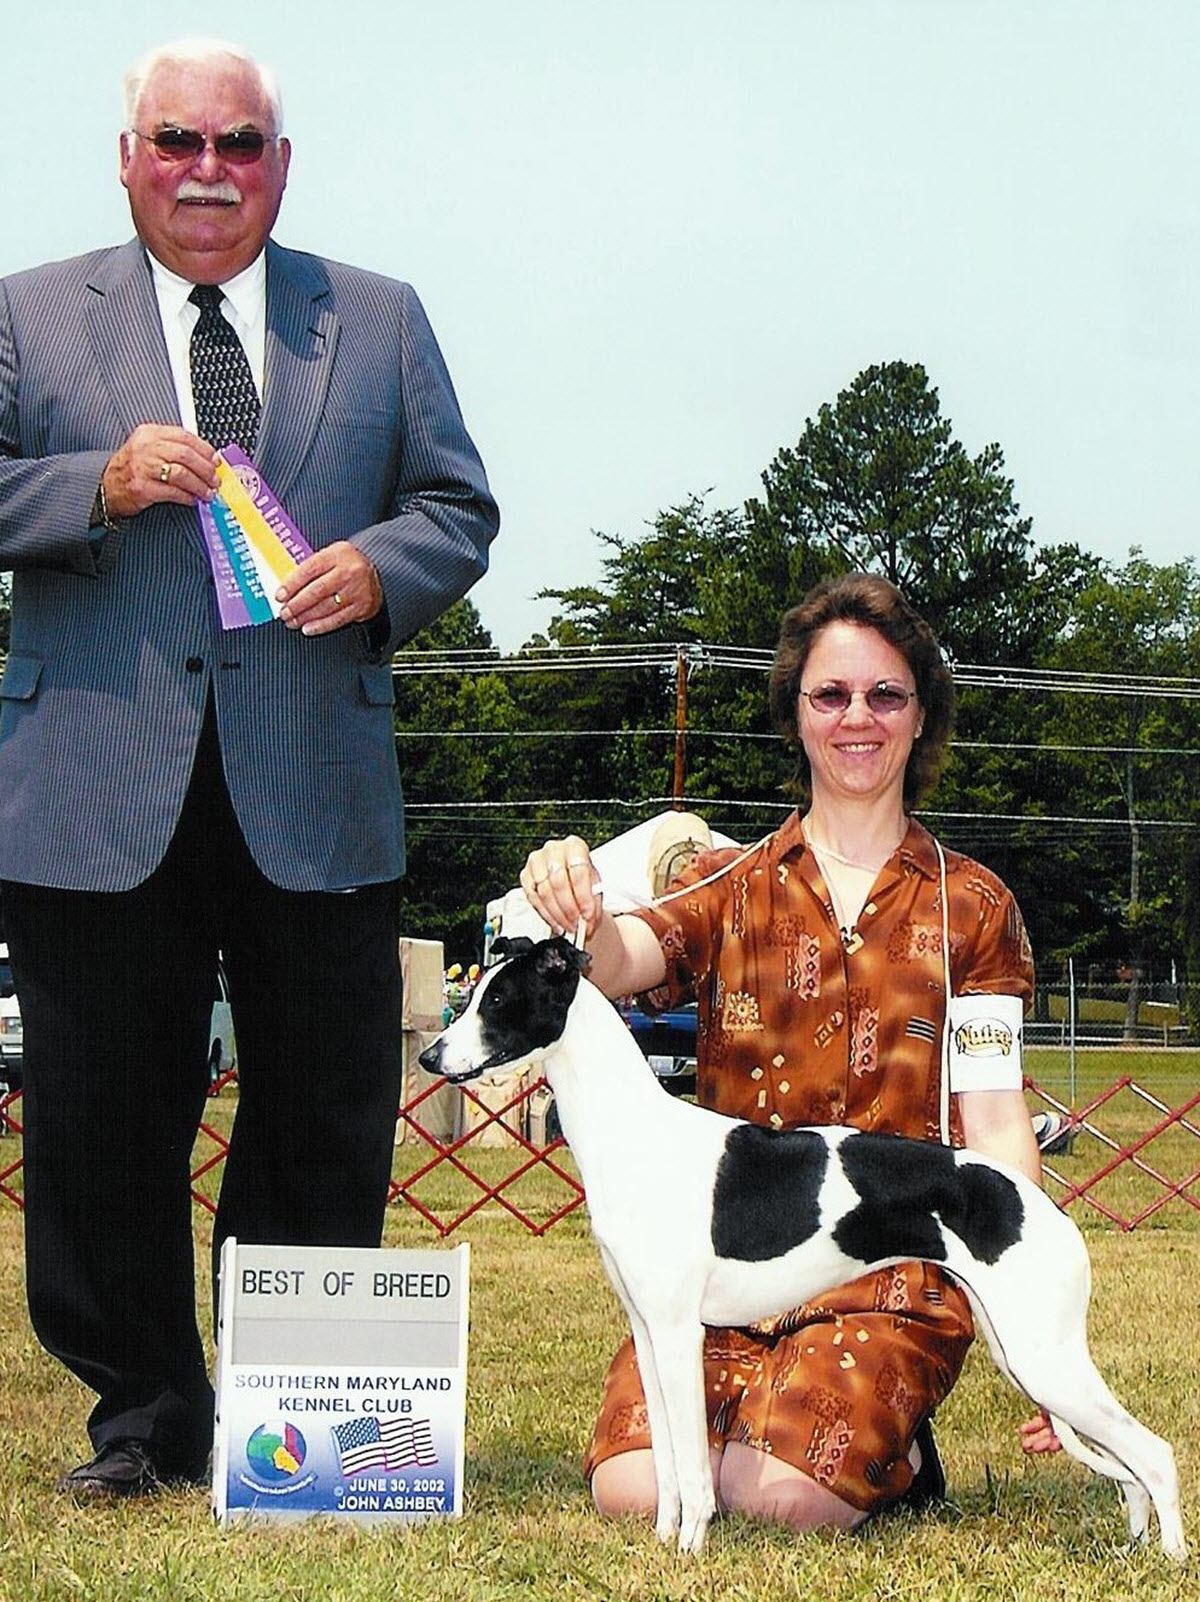 Janine with Muse, winning her first Best of Breed